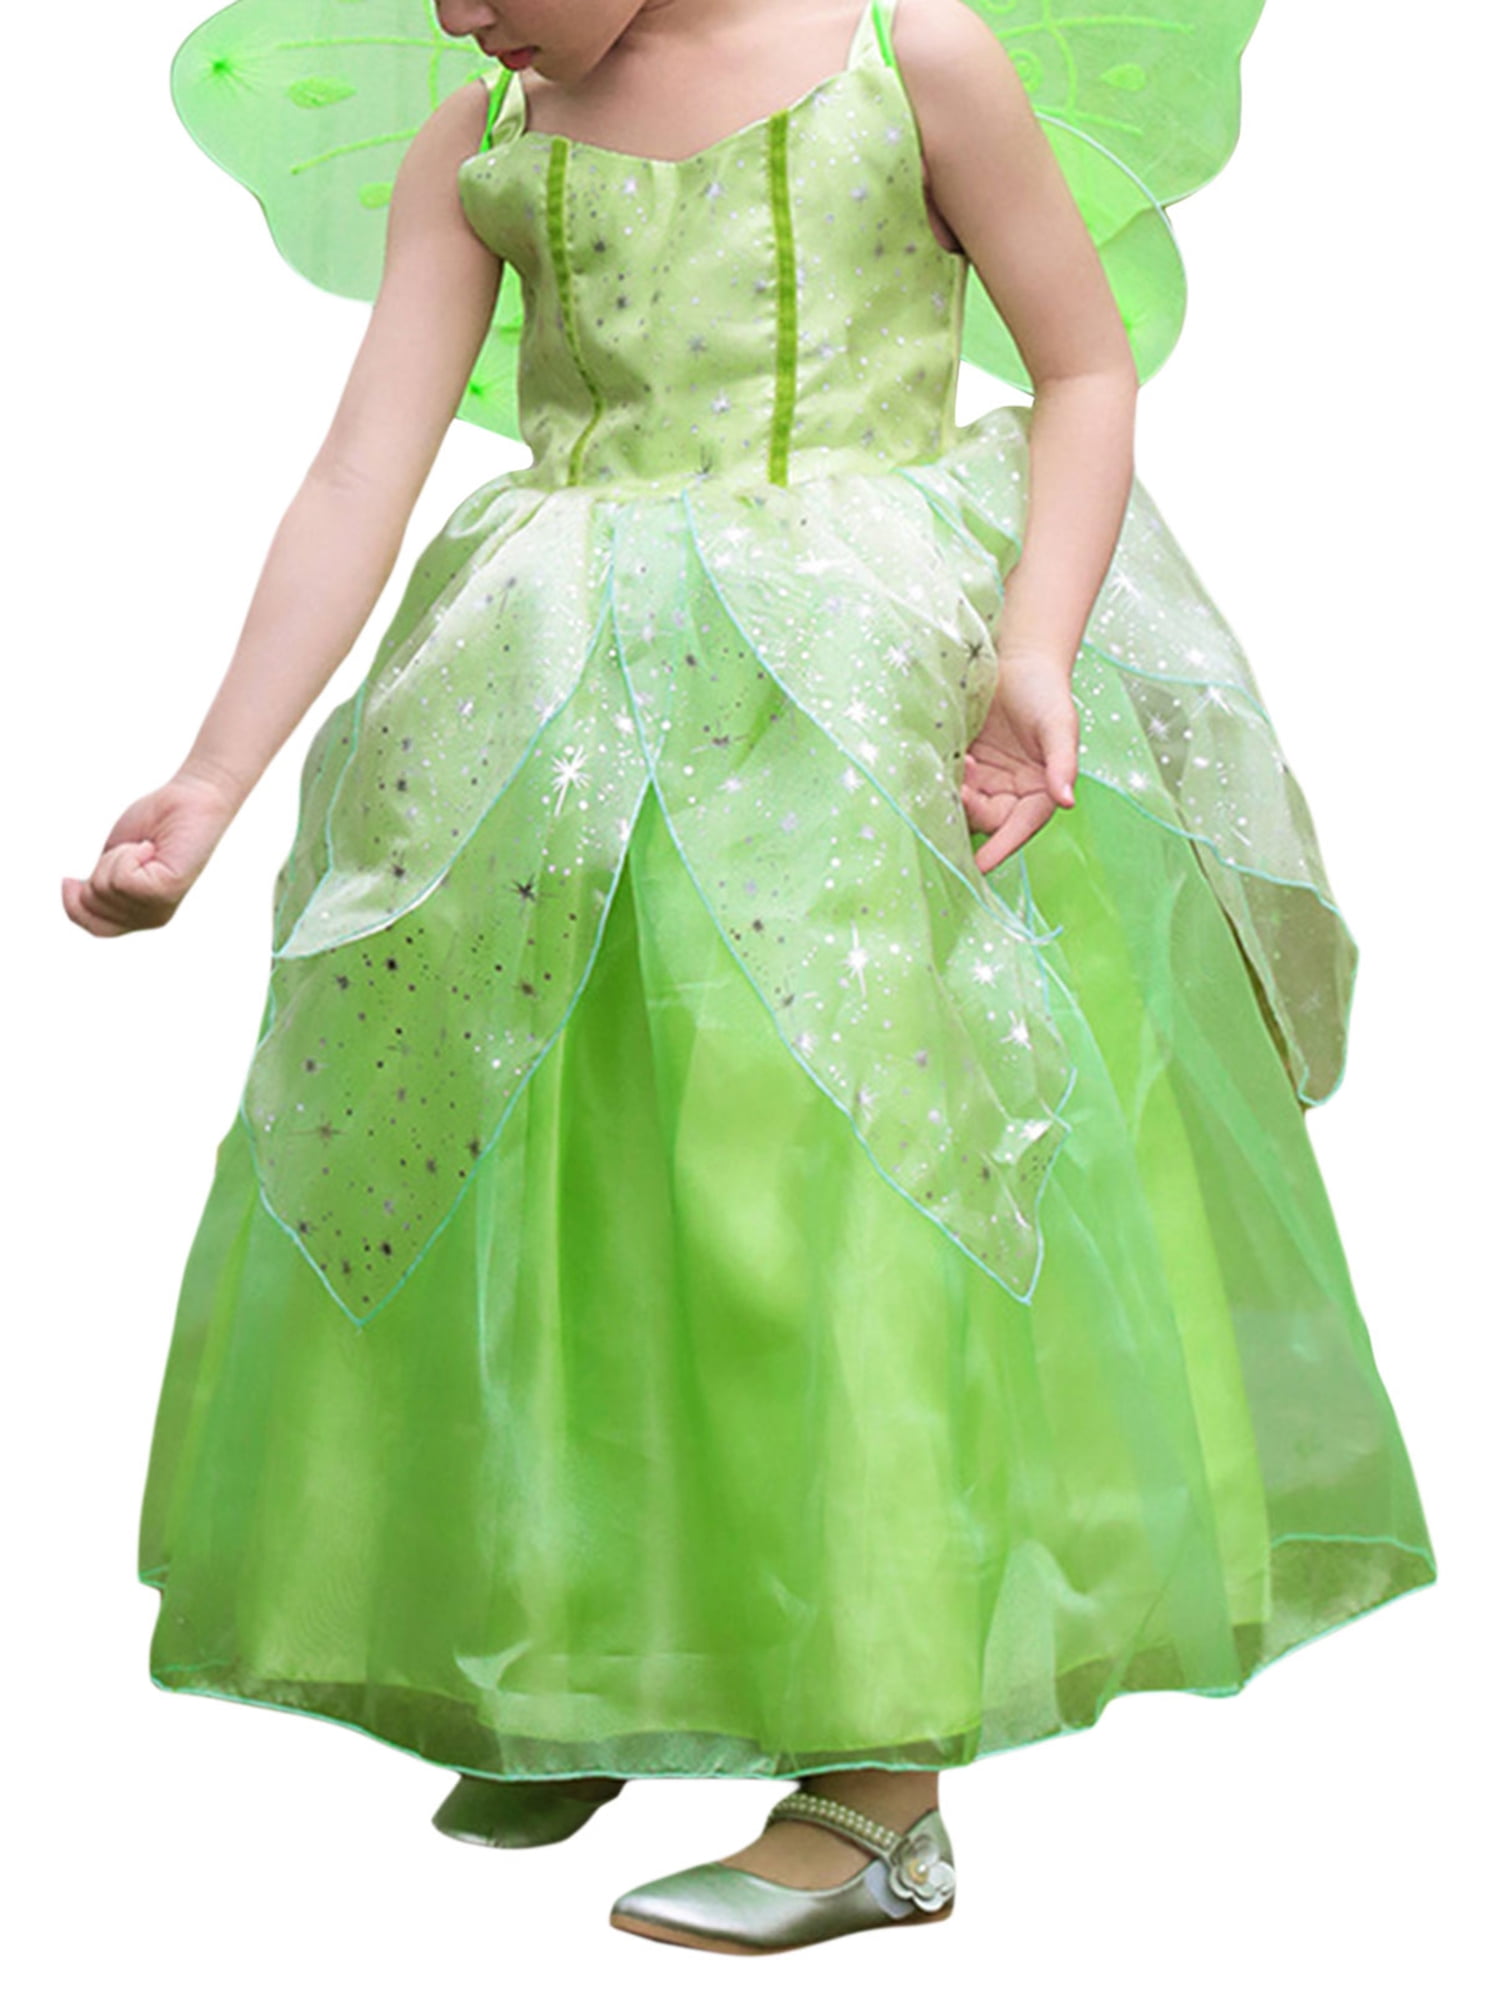 Butterfly Wings Fairy Wings, Wings Fairy Costume Women, Party Fantasy Dress  with Elastic Shoulder Straps, Colour Changing Fairy Costume, Children,  Carnival Props, Cosplay : Amazon.com.au: Toys & Games